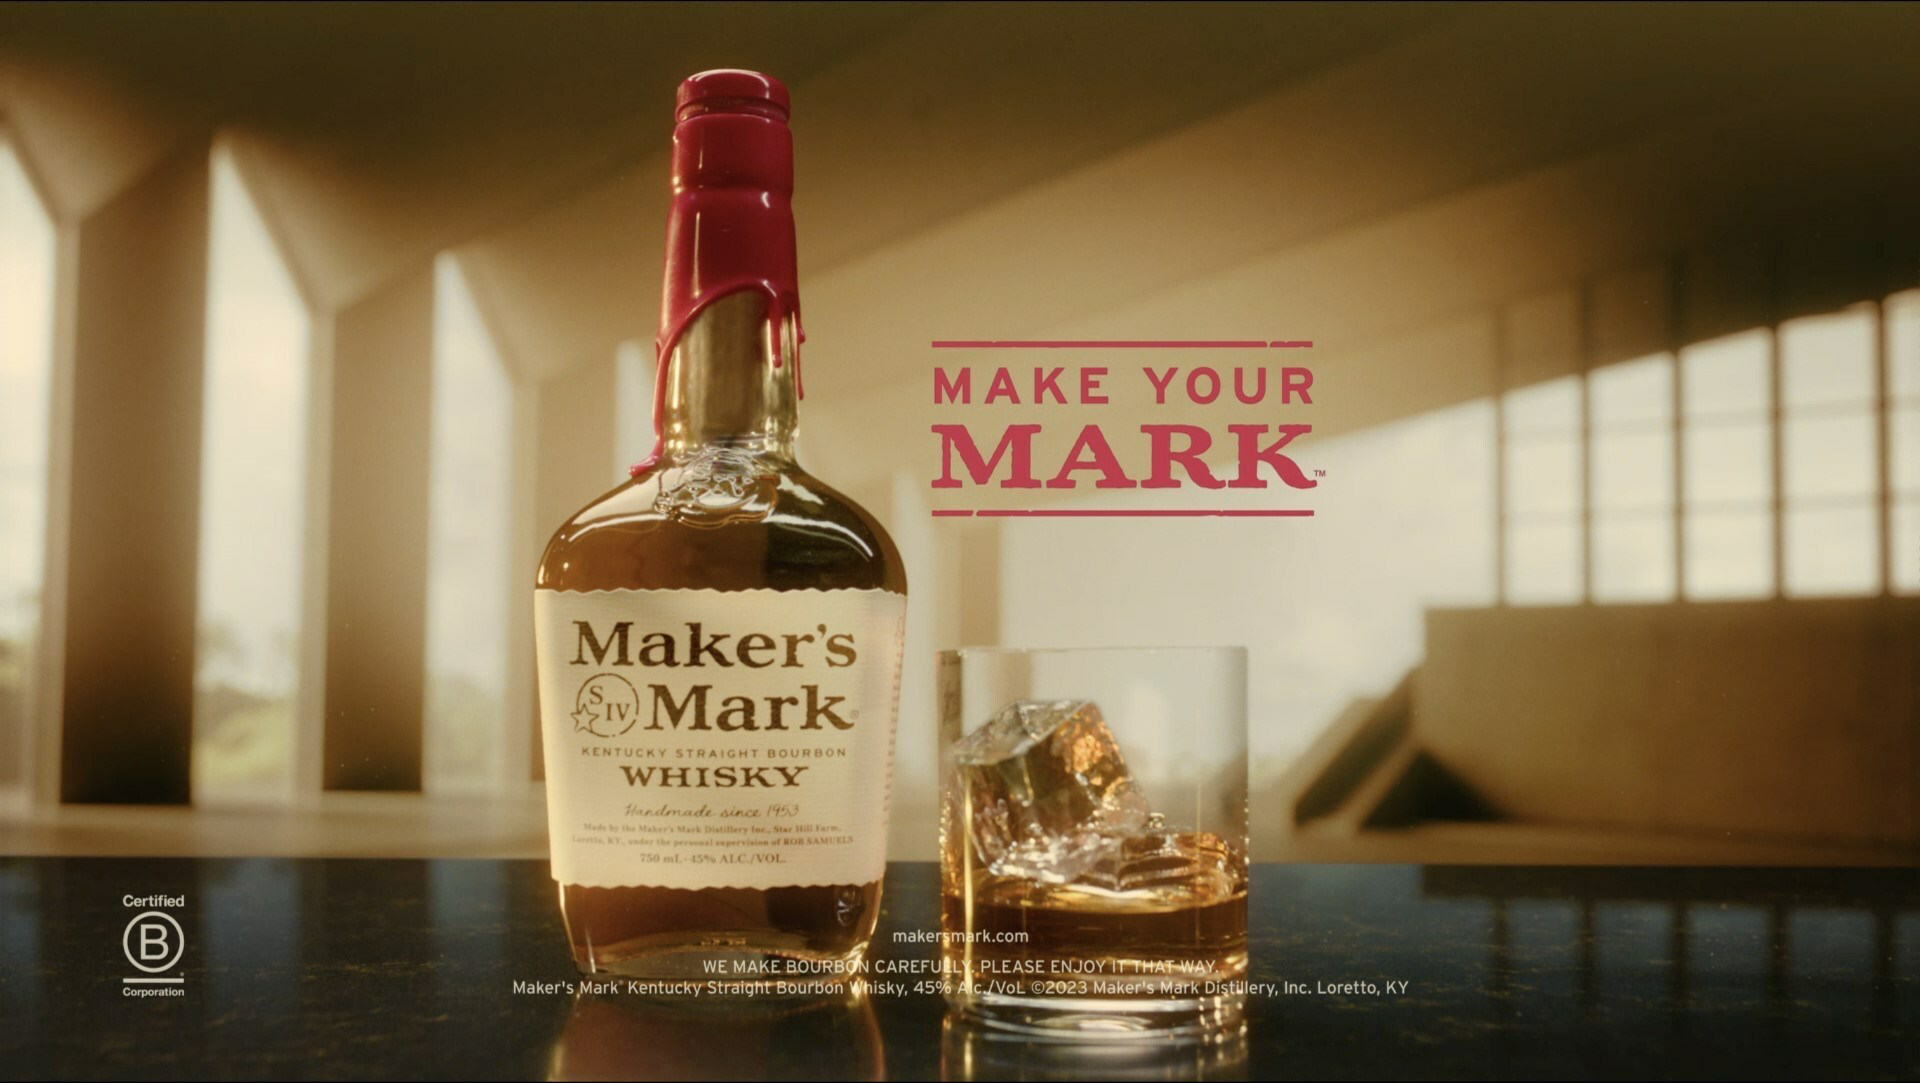 Maker’s Mark Challenges Bourbon Drinkers to “Make Your Mark”